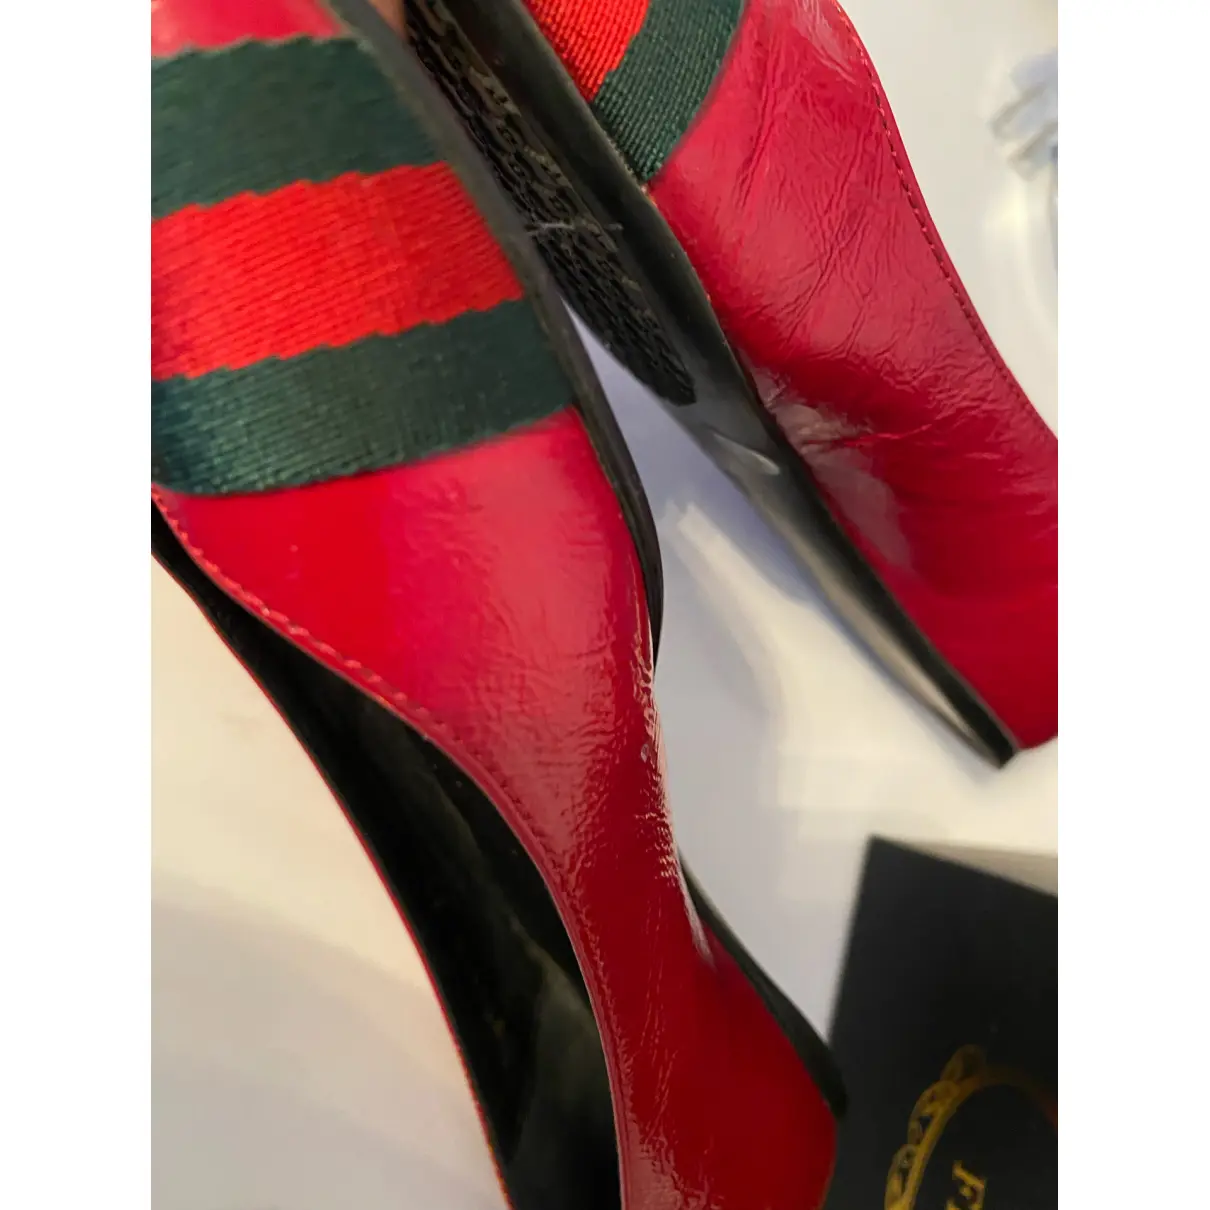 Buy Gucci Patent leather ballet flats online